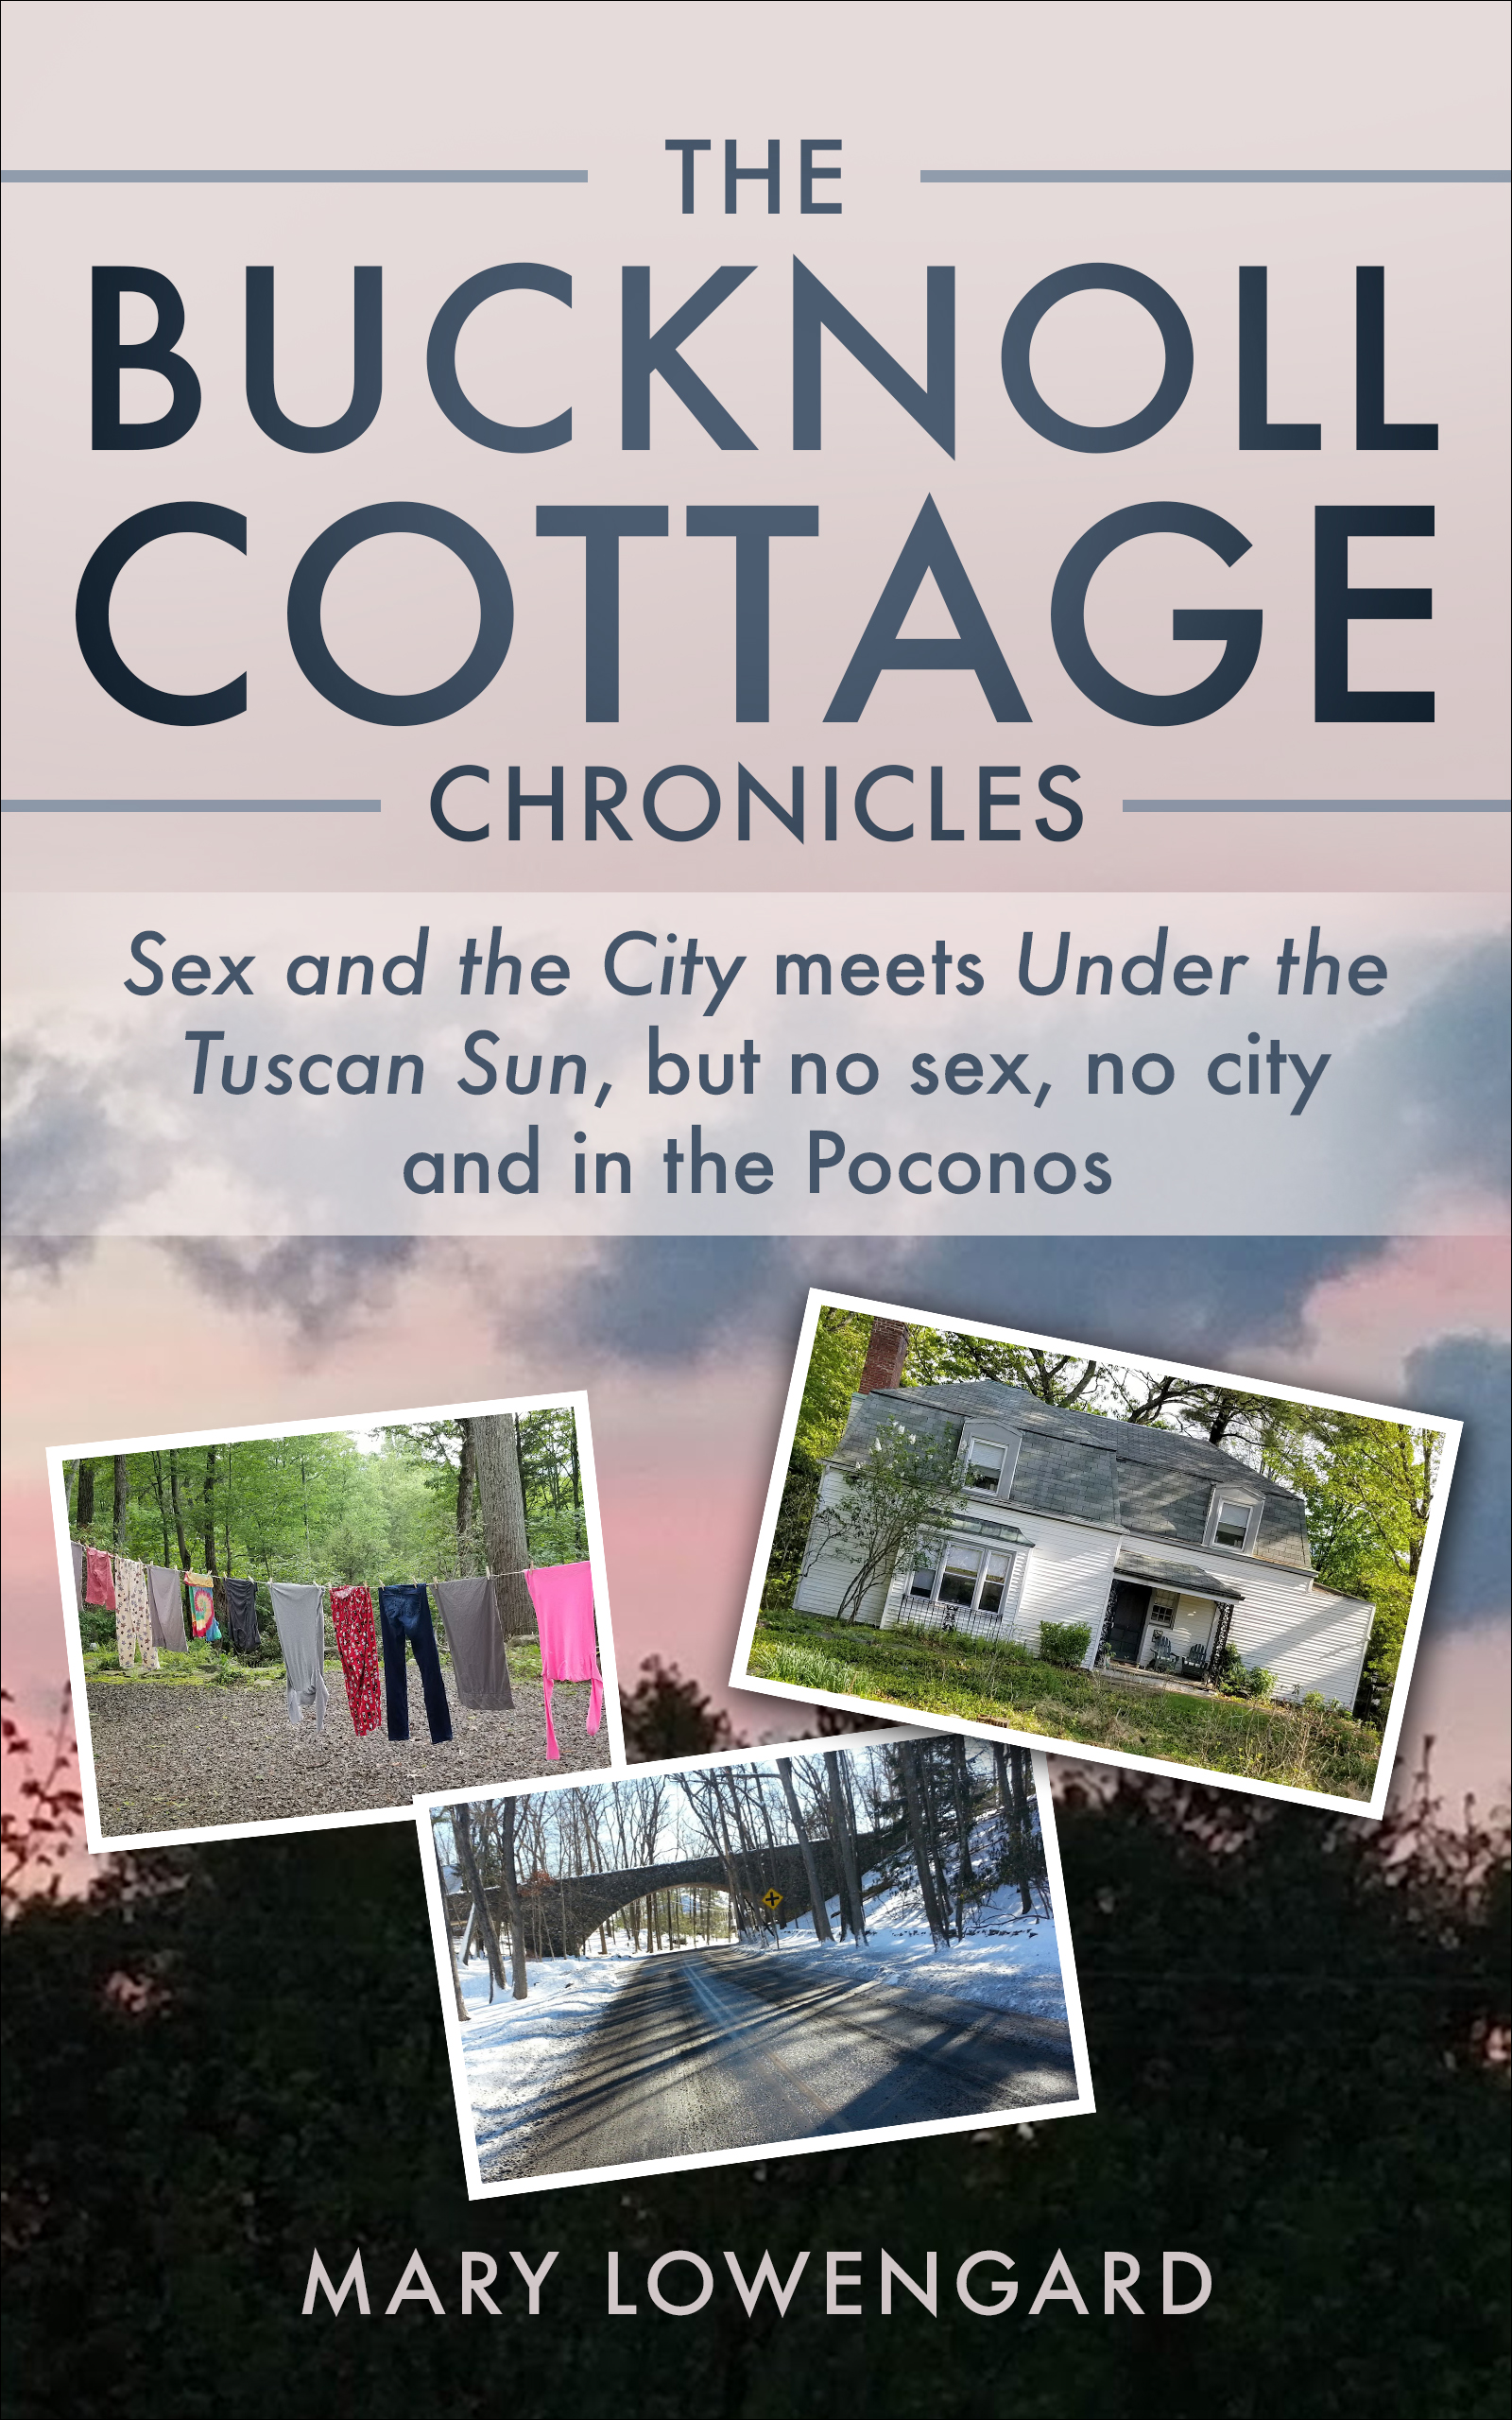 The Bucknoll Cottage Chronicles by Mary Lowengard